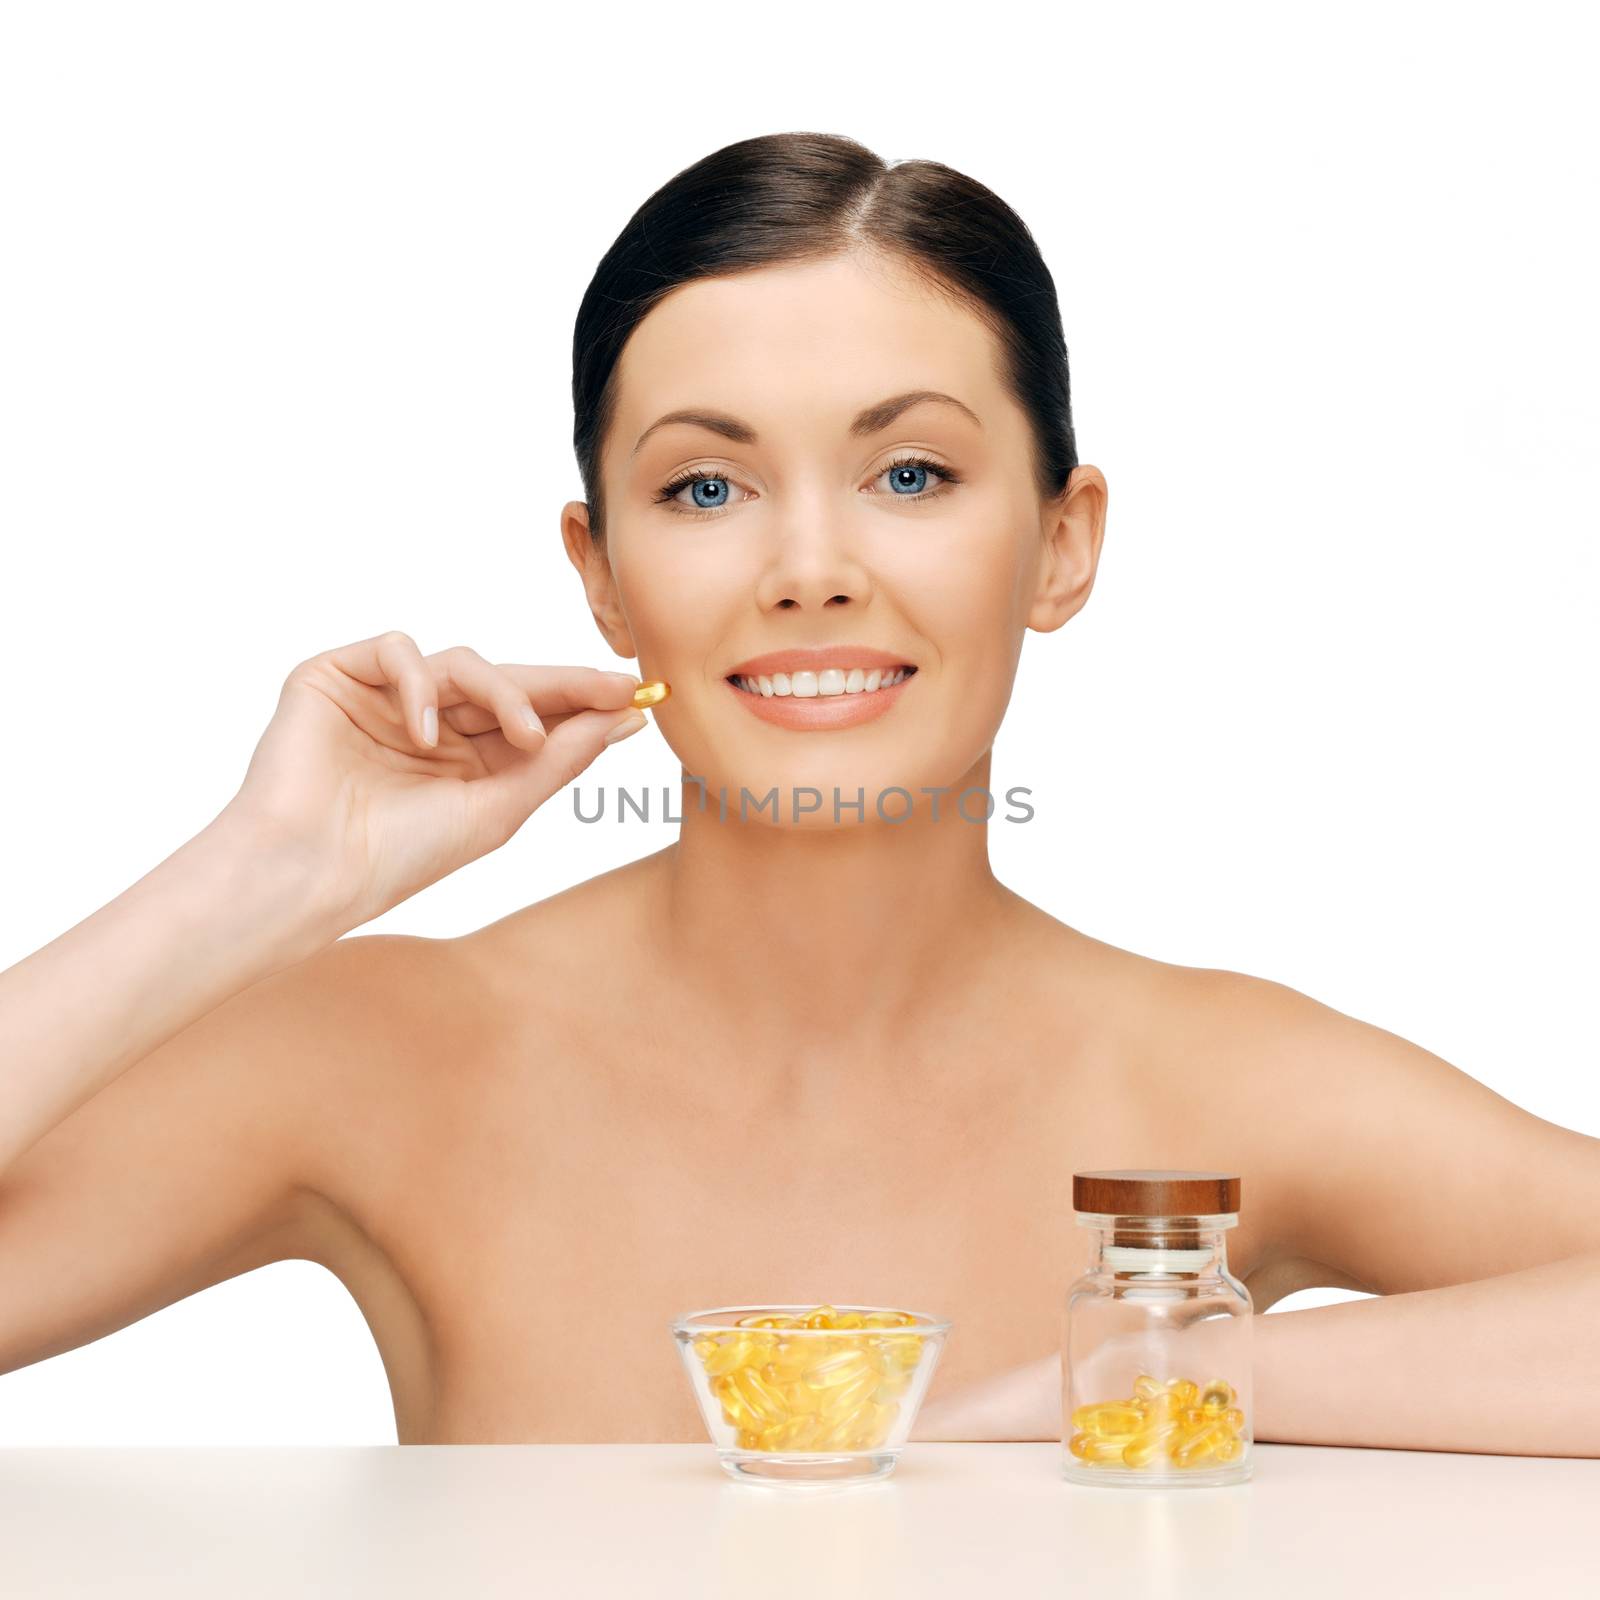 healthcare and beauty concept - beautiful woman with omega 3 vitamins